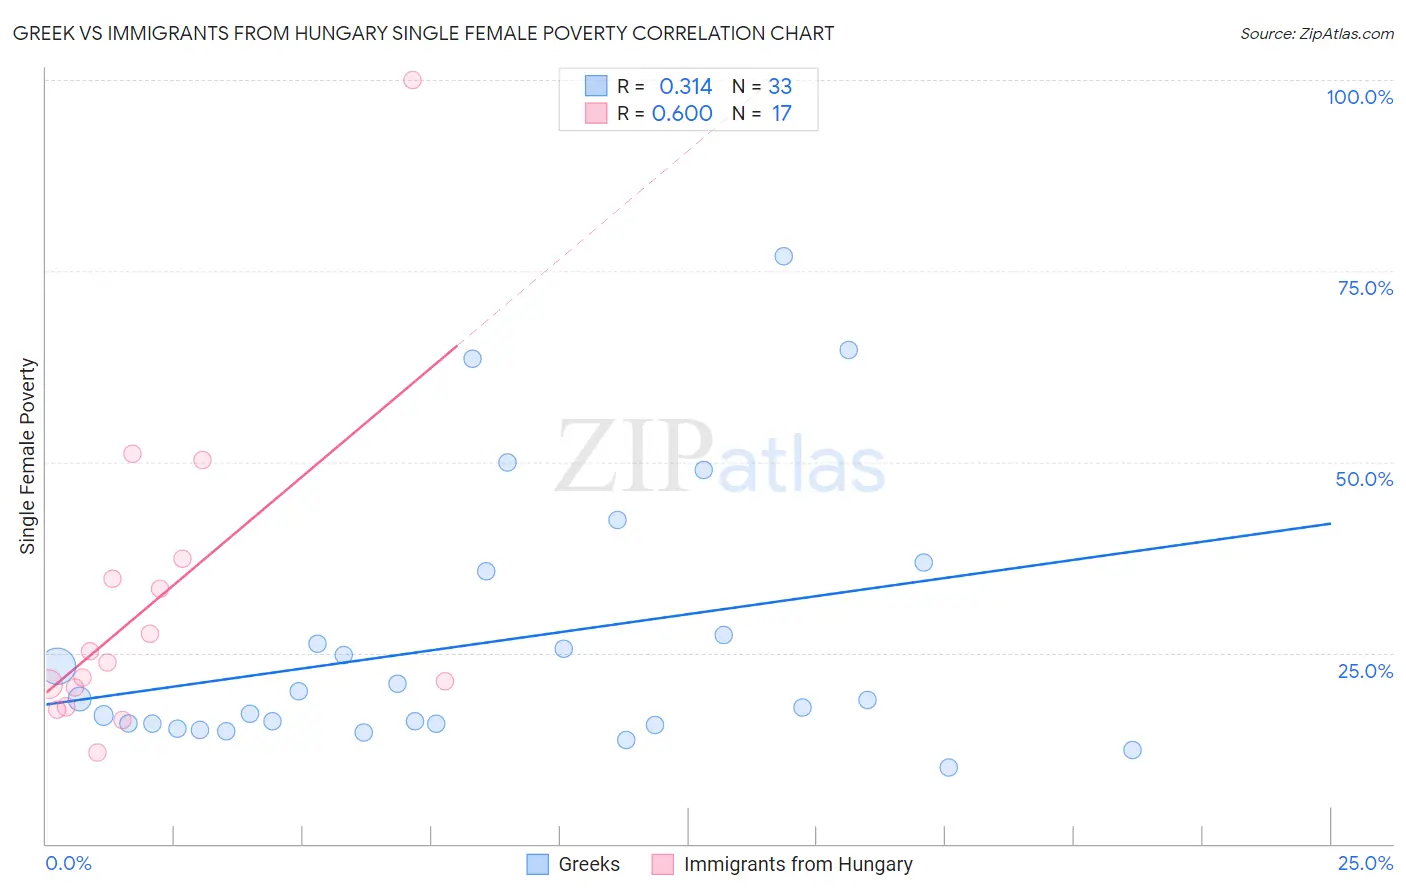 Greek vs Immigrants from Hungary Single Female Poverty